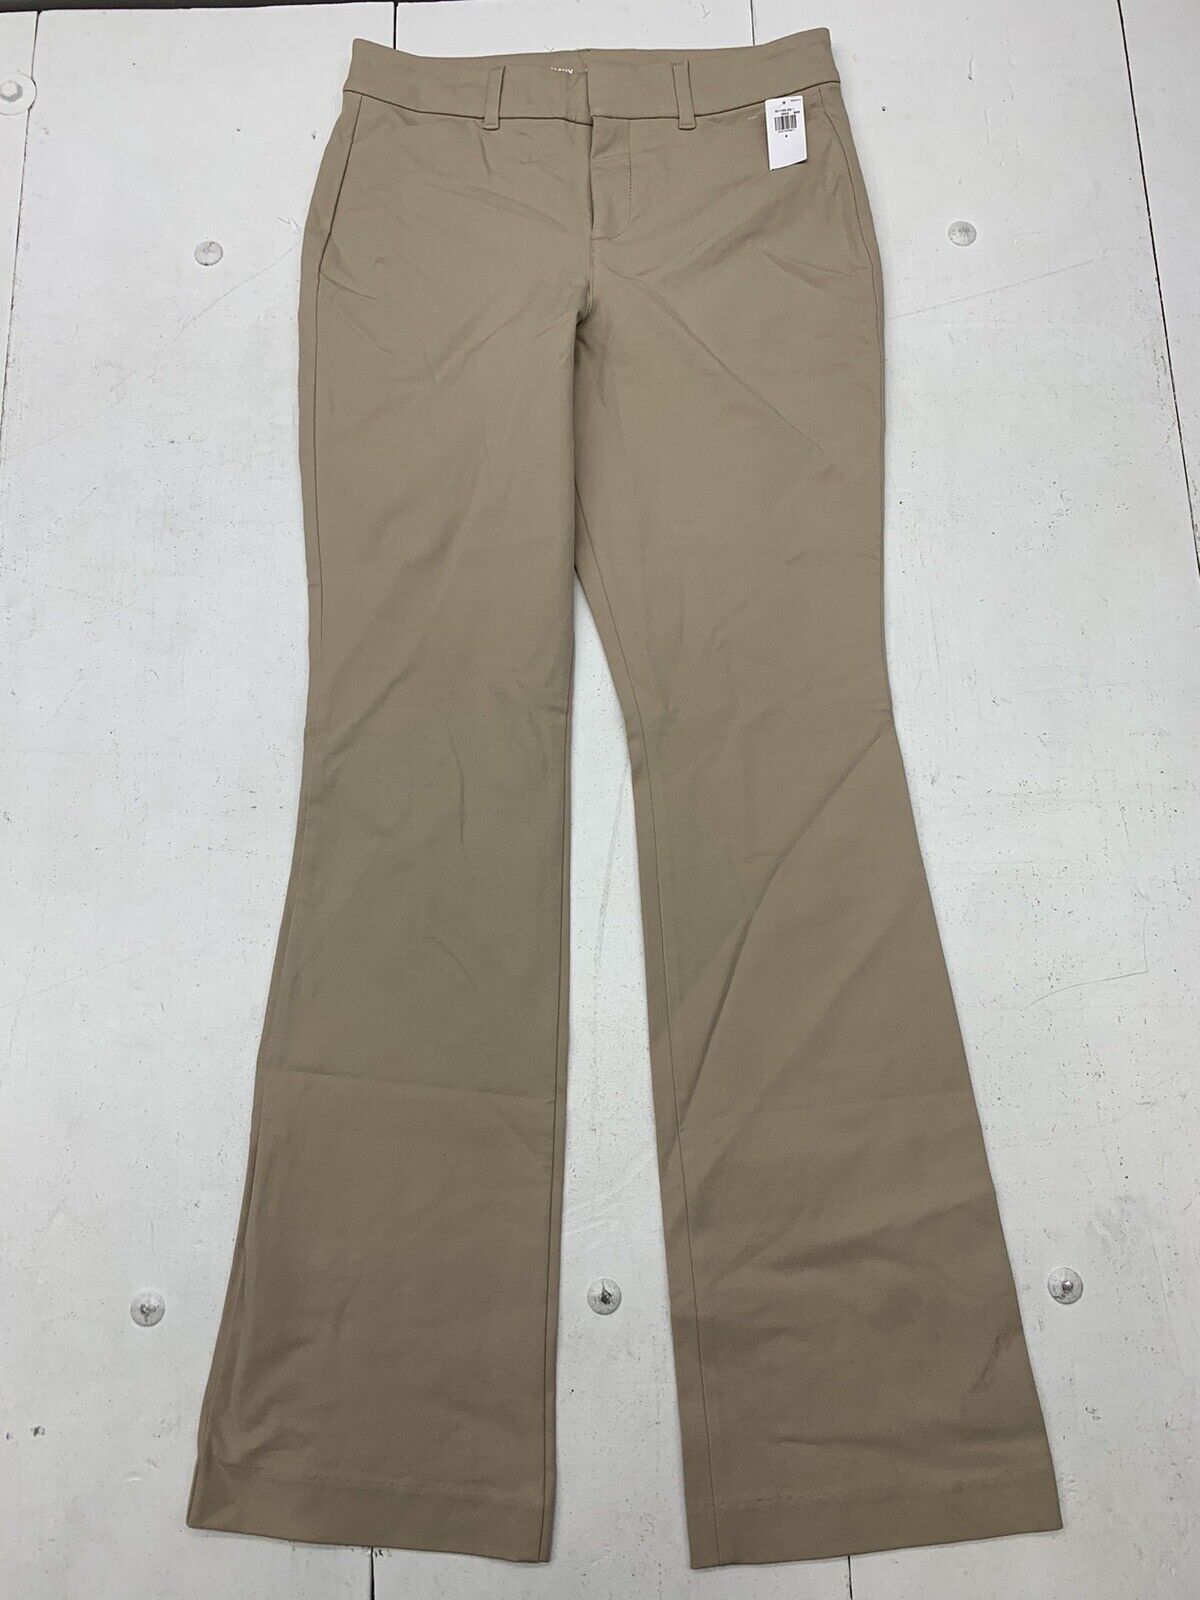 Old Navy Womens Brown High Rise Pixie Flare Pants Size 6 - beyond exchange